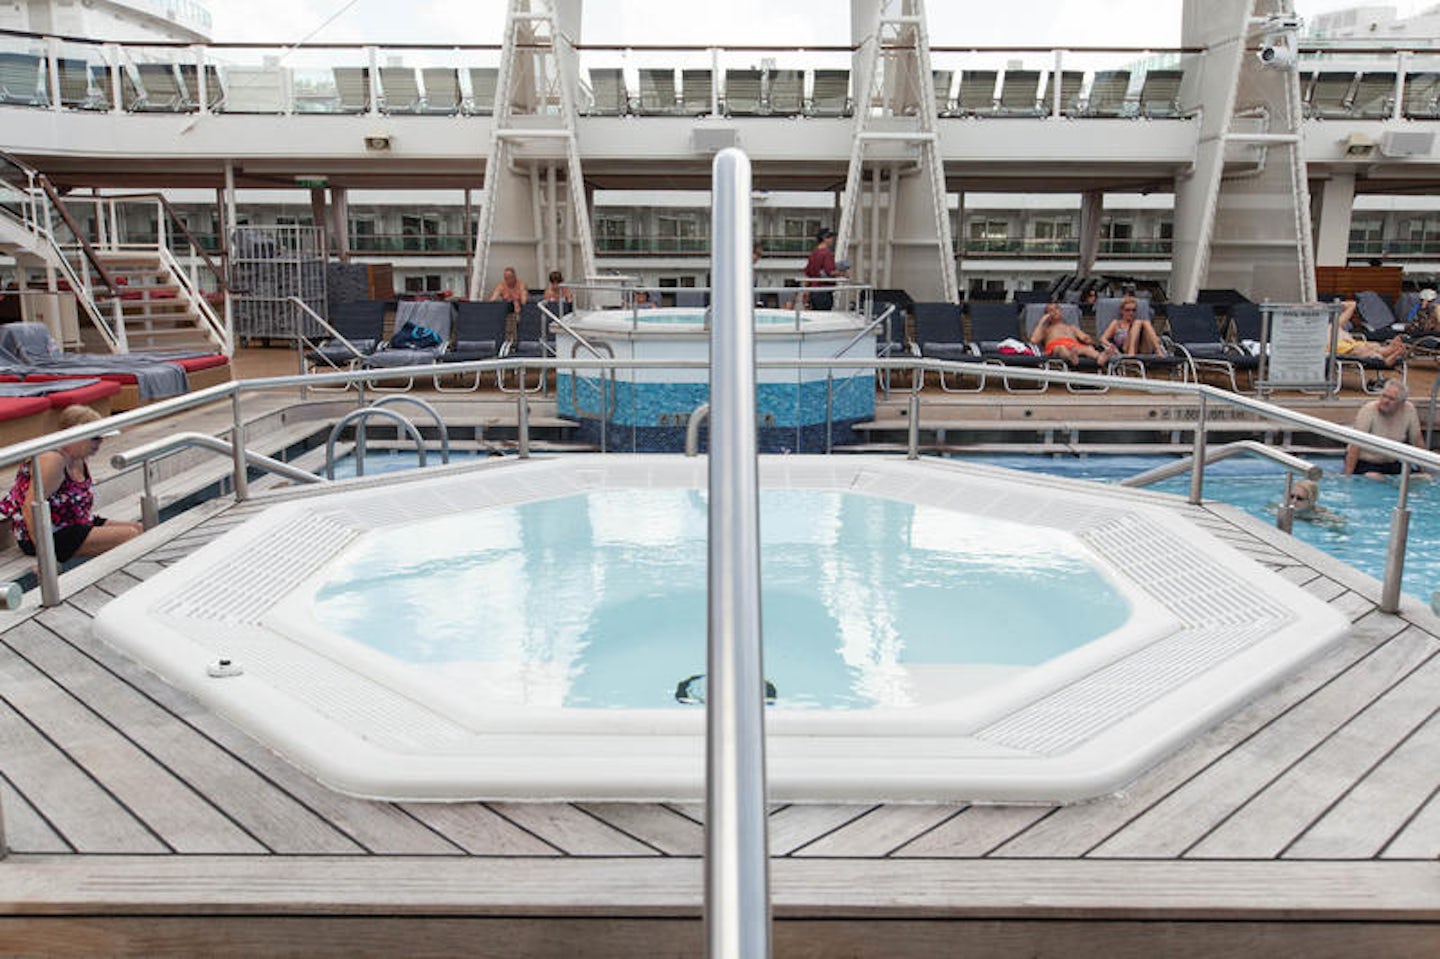 The Main Pool on Celebrity Silhouette